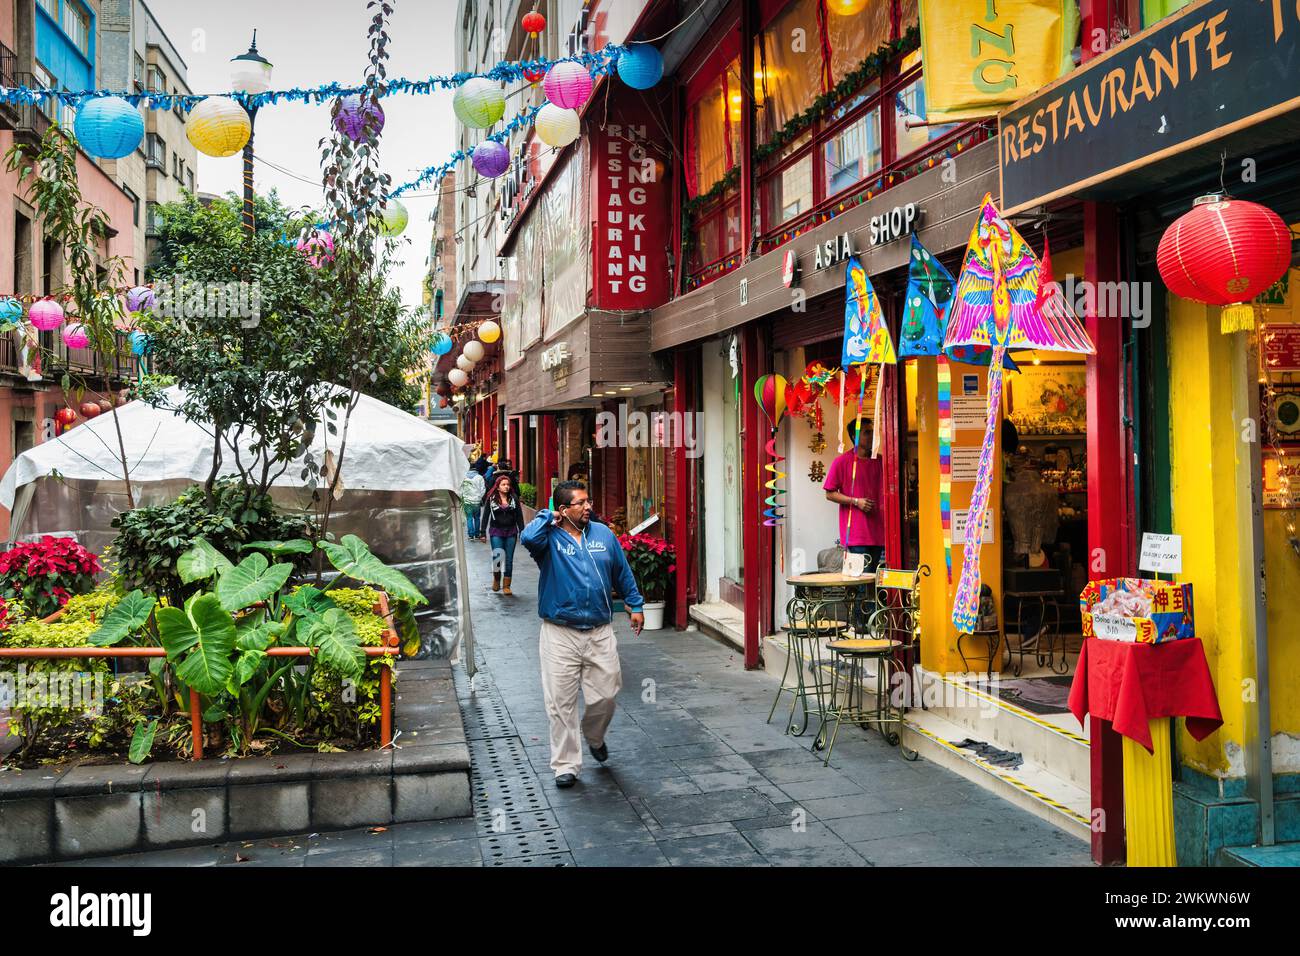 Pedestrians walk past restaurant and store facades in Chinatown in central Mexico City, Mexico. Stock Photo